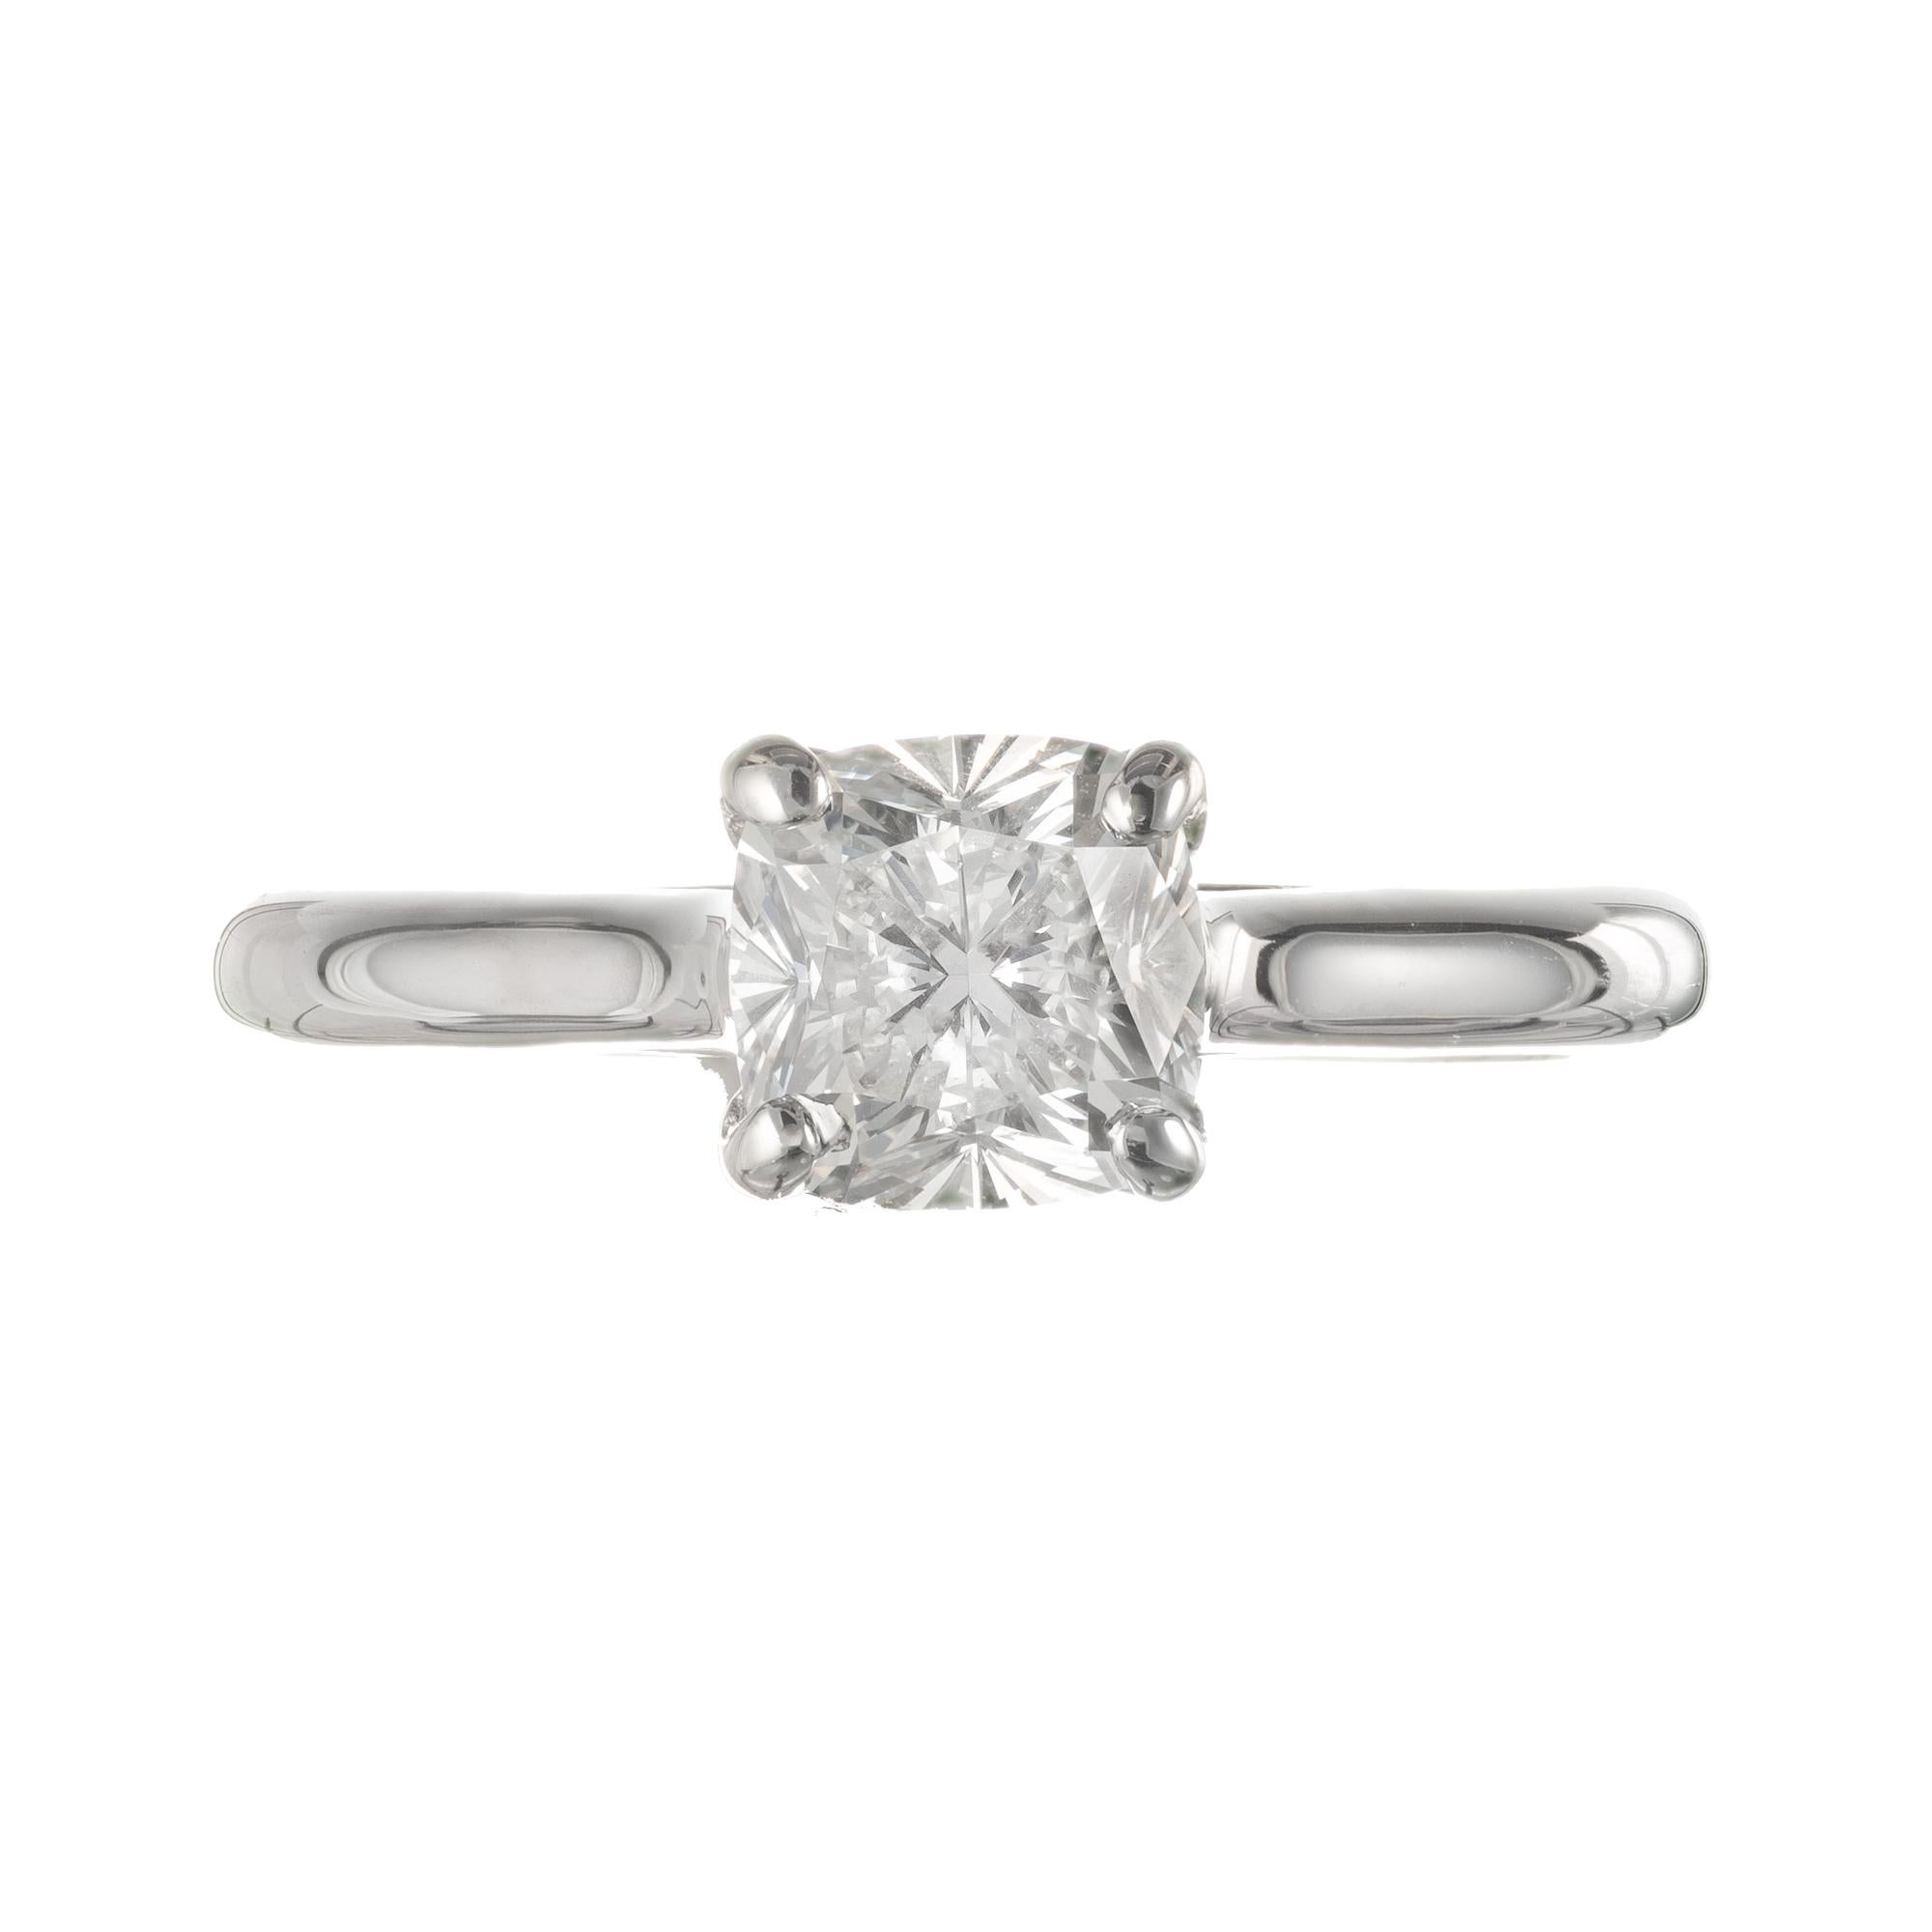 Fire cushion diamond engagement ring. Extra brilliant cushion shape diamond cut with extra surface area to create a patented “fire cushion”. Original 18k white gold simple pave diamond flush prong setting. 

1 cushion brilliant cut I VS diamond,